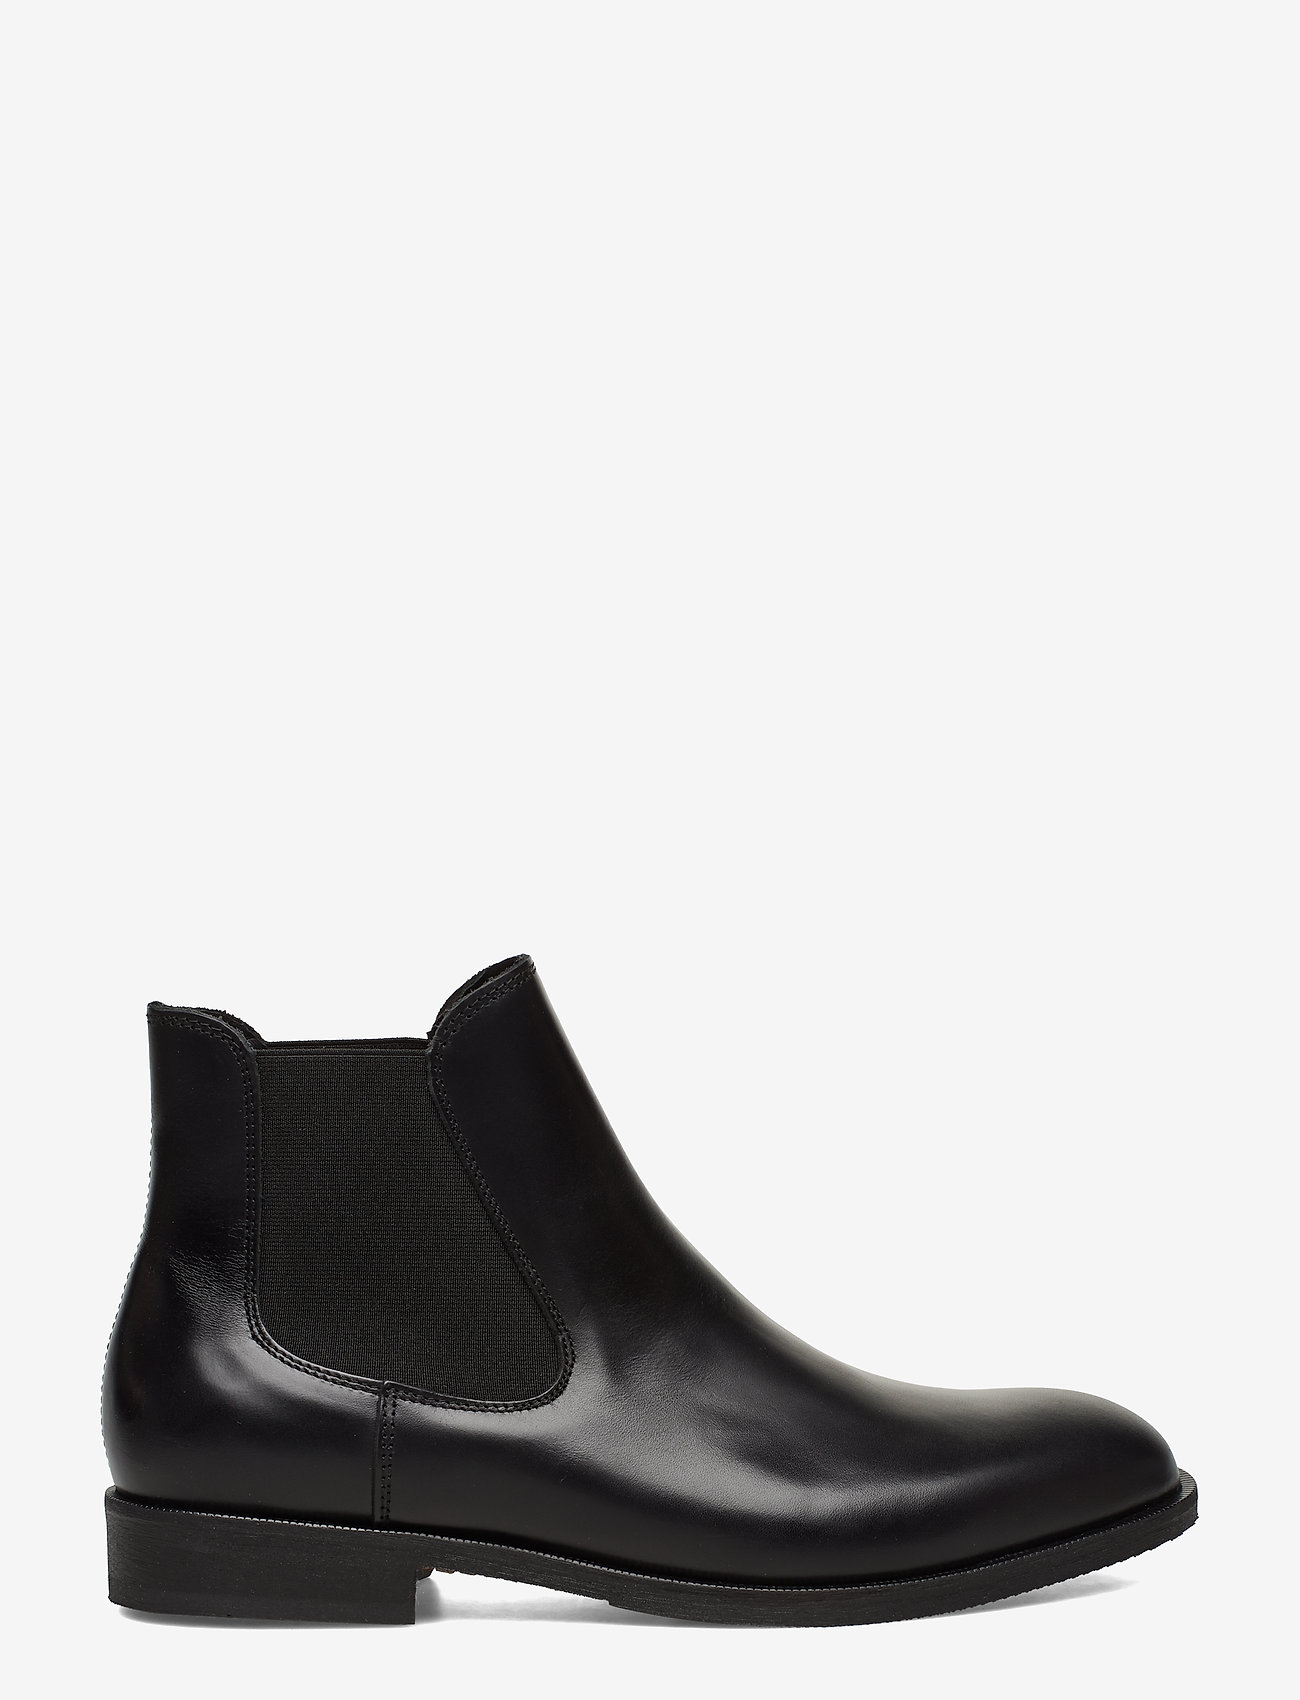 Selected Homme Slhlouis Leather Chelsea Boot B - Chelsea boots | Boozt.com